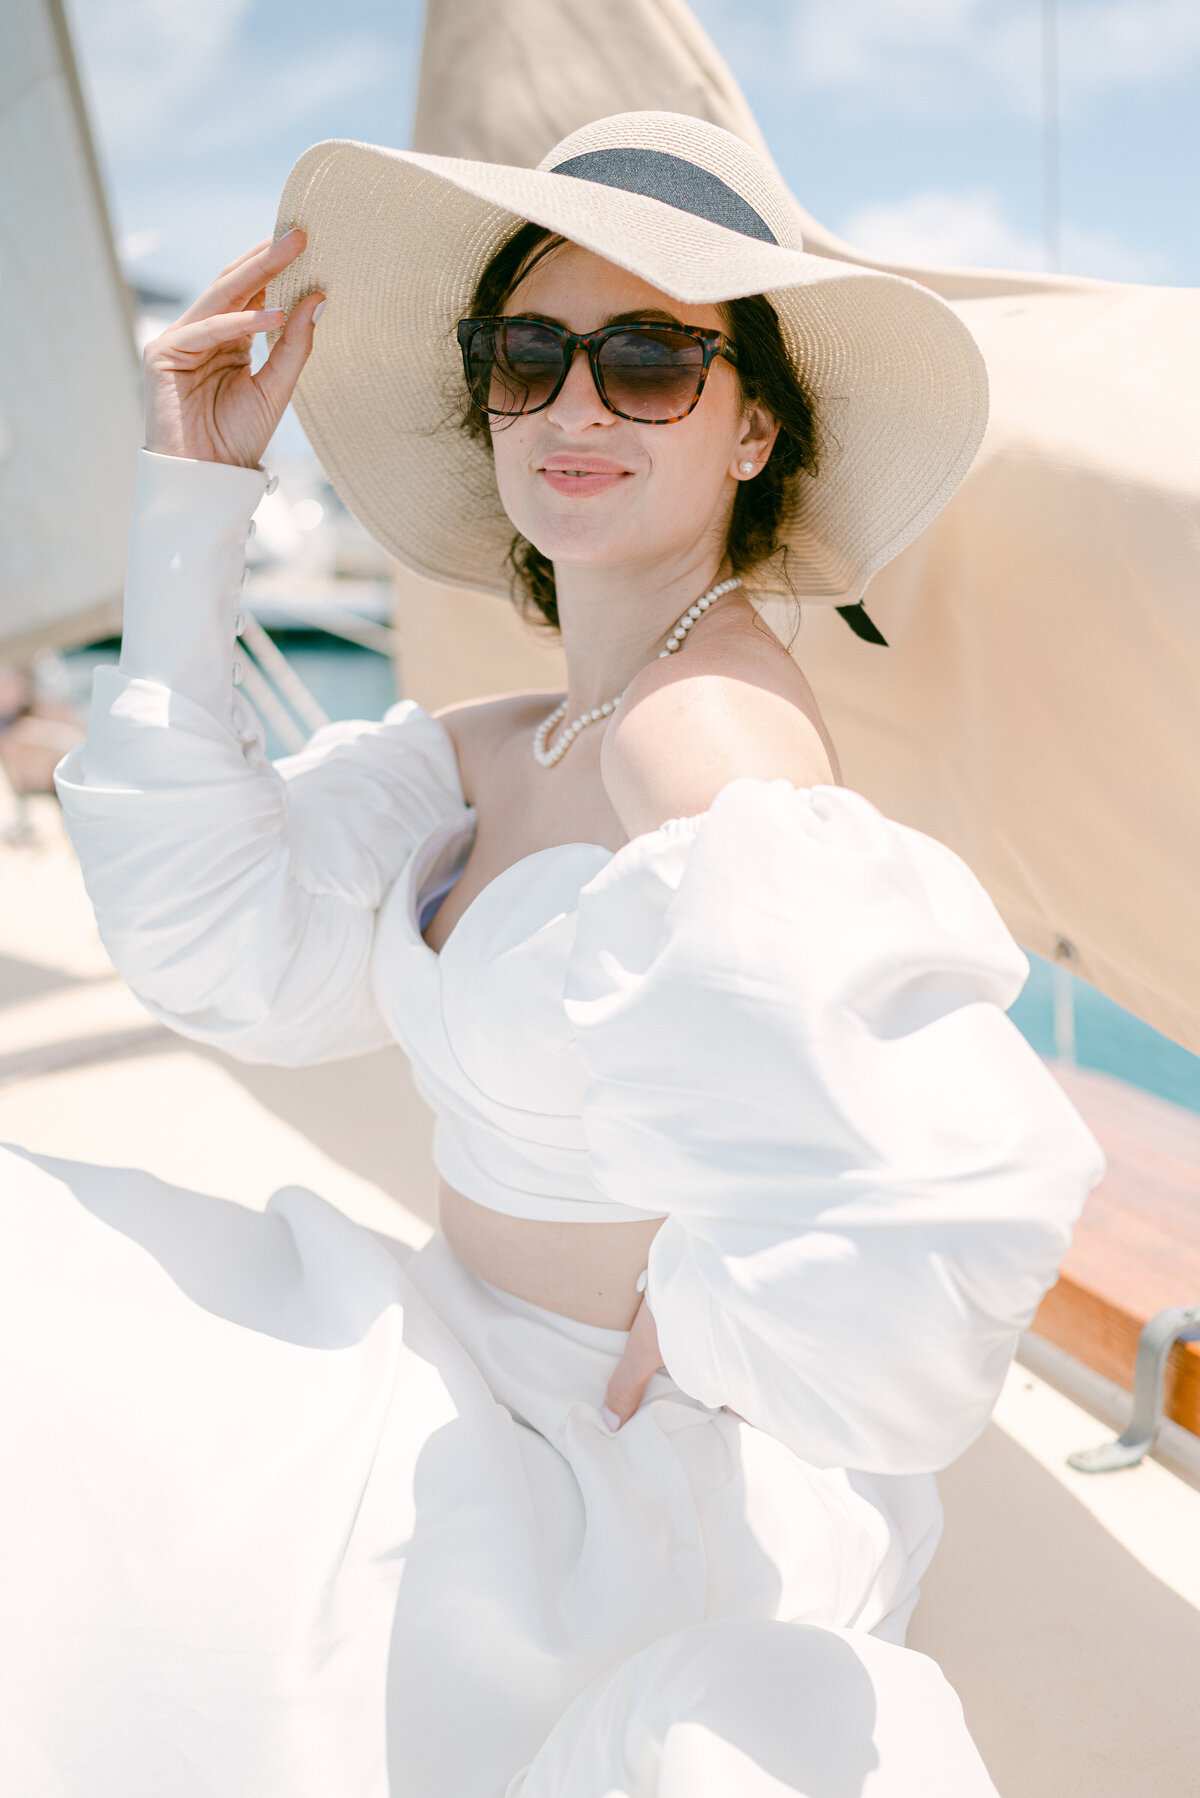 Bride wearing sunglasses and holding sunhat